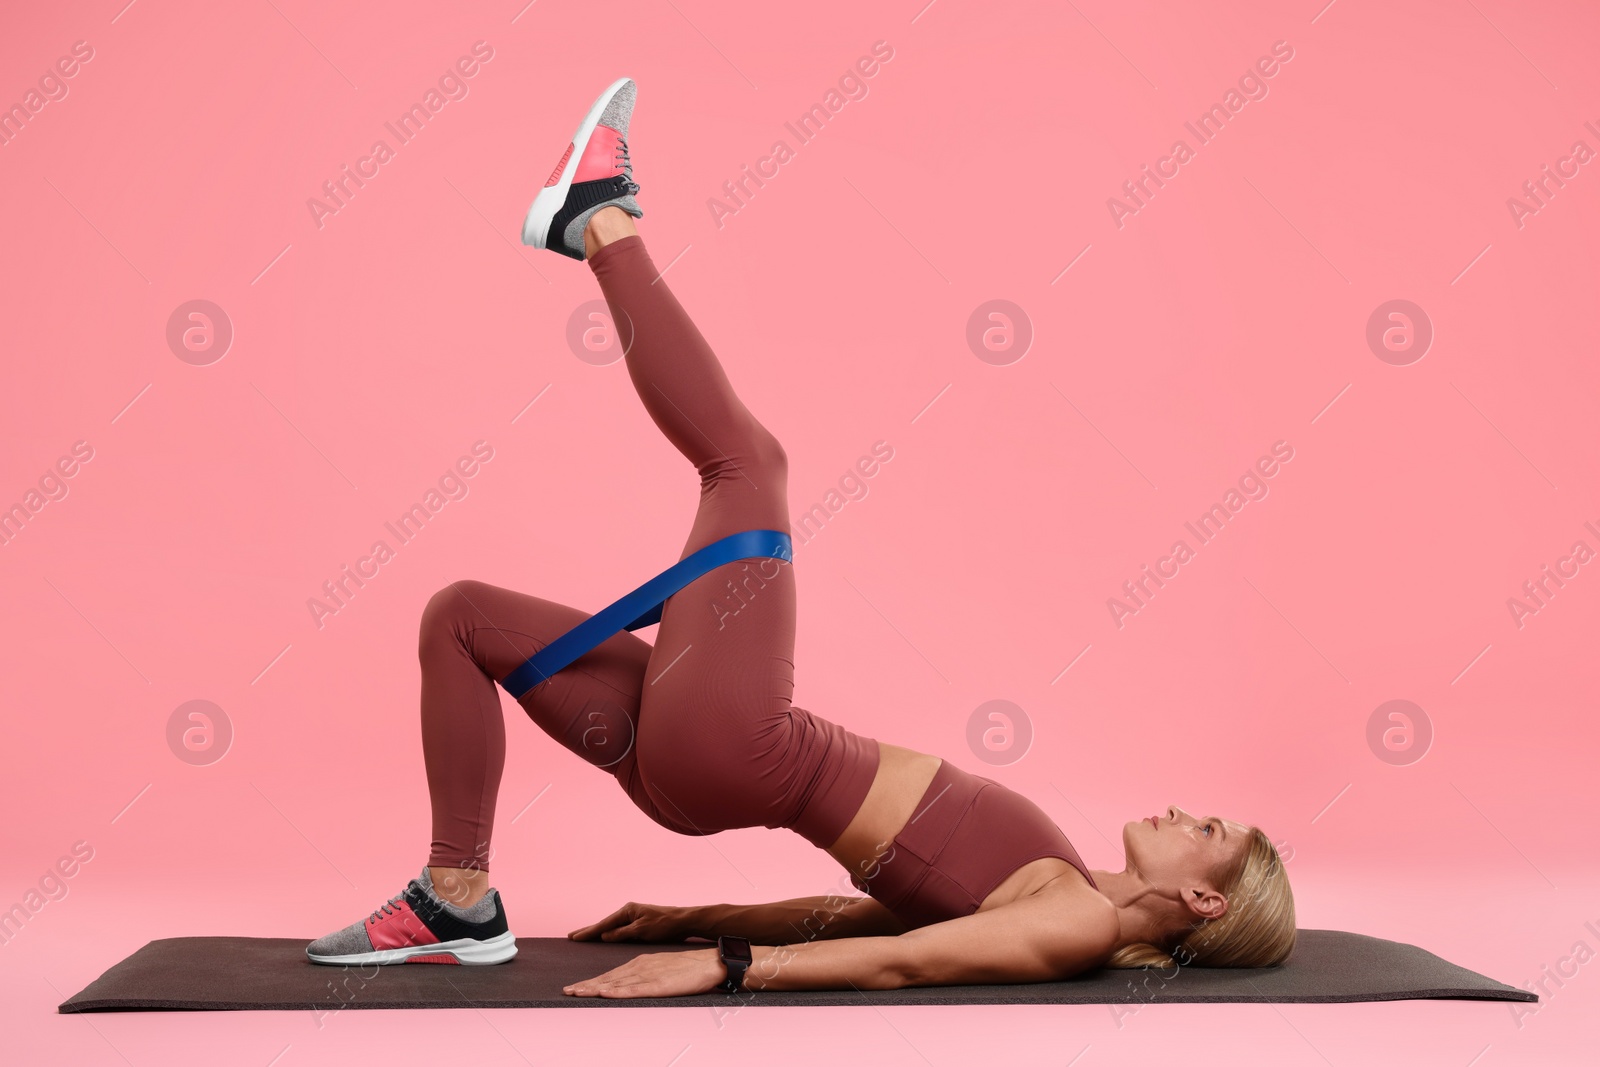 Photo of Woman exercising with elastic resistance band on fitness mat against pink background